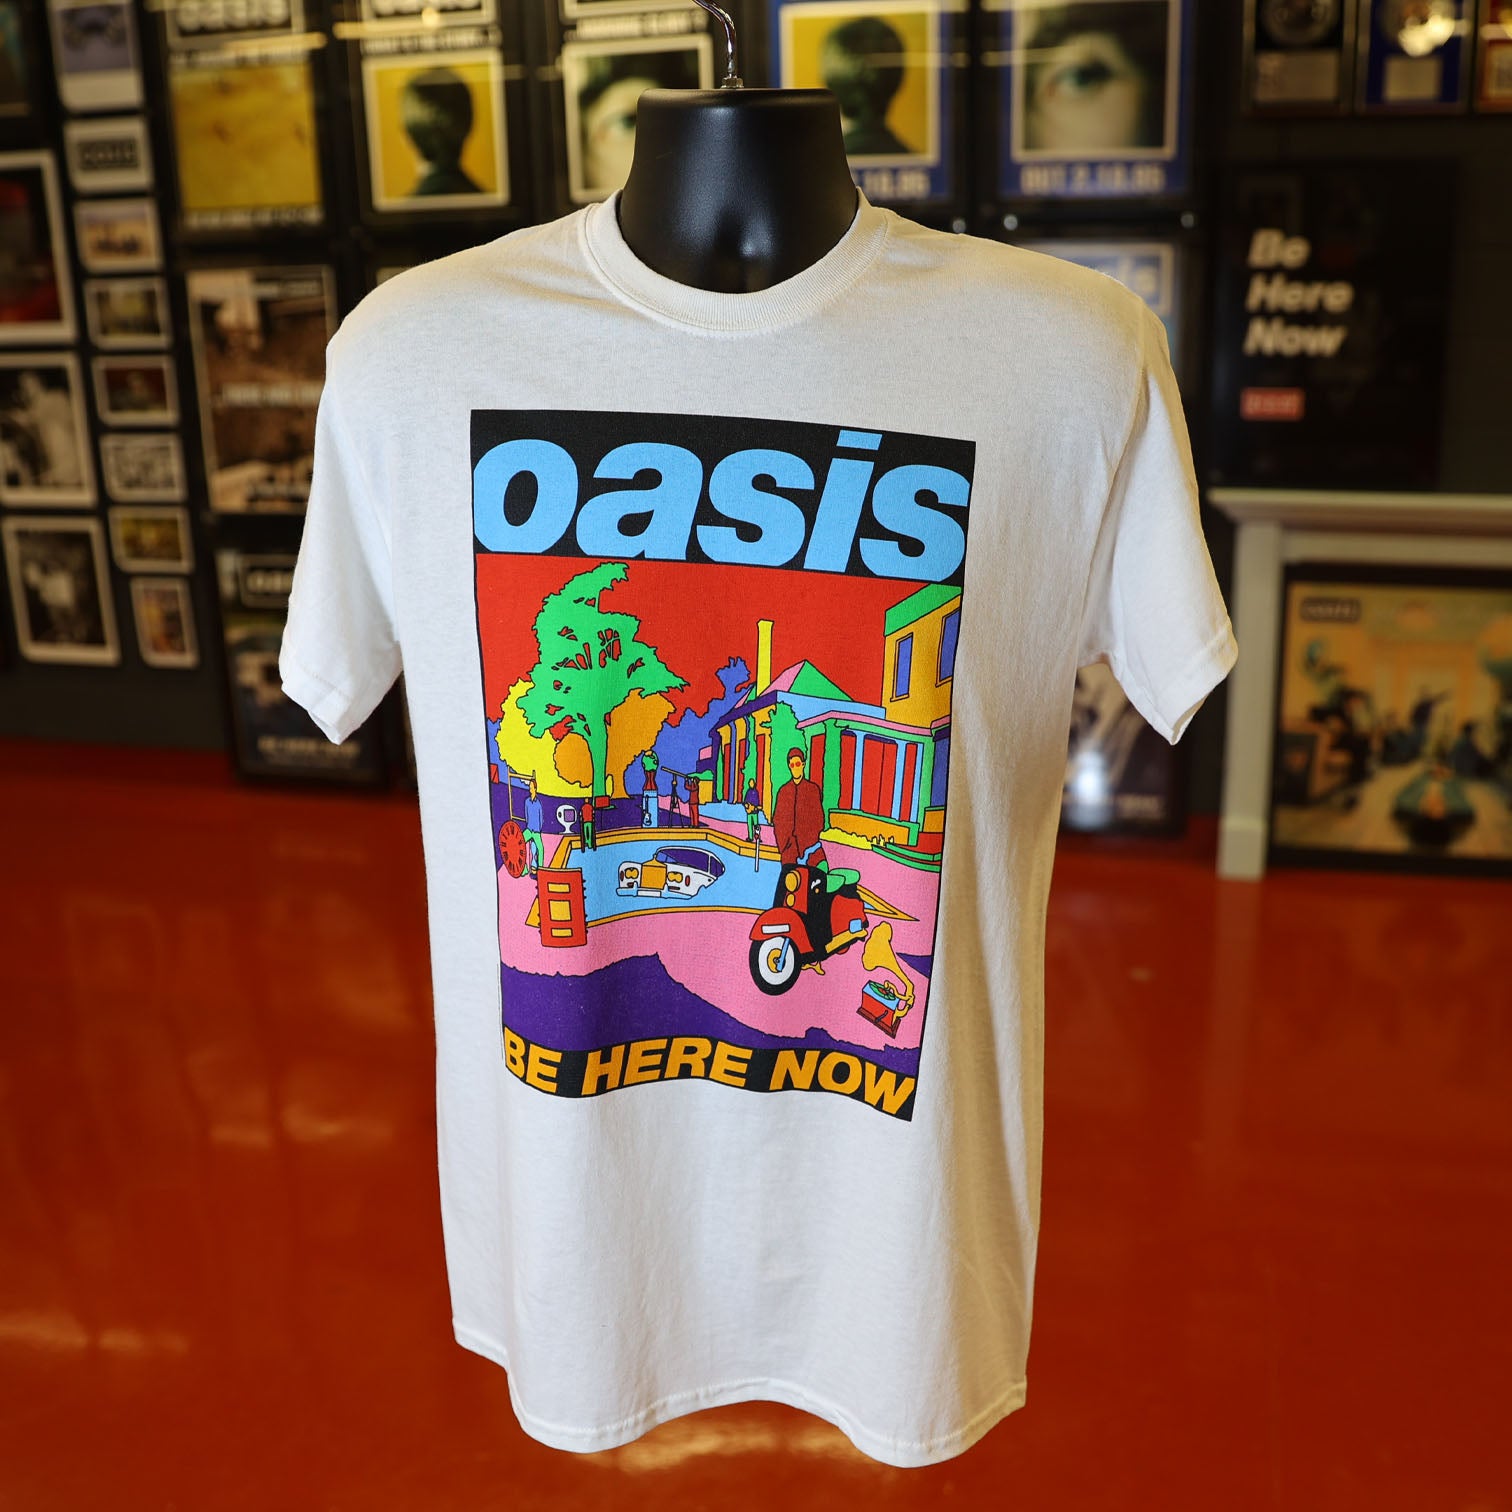 Oasis - Be Here Now T Shirt - New Item